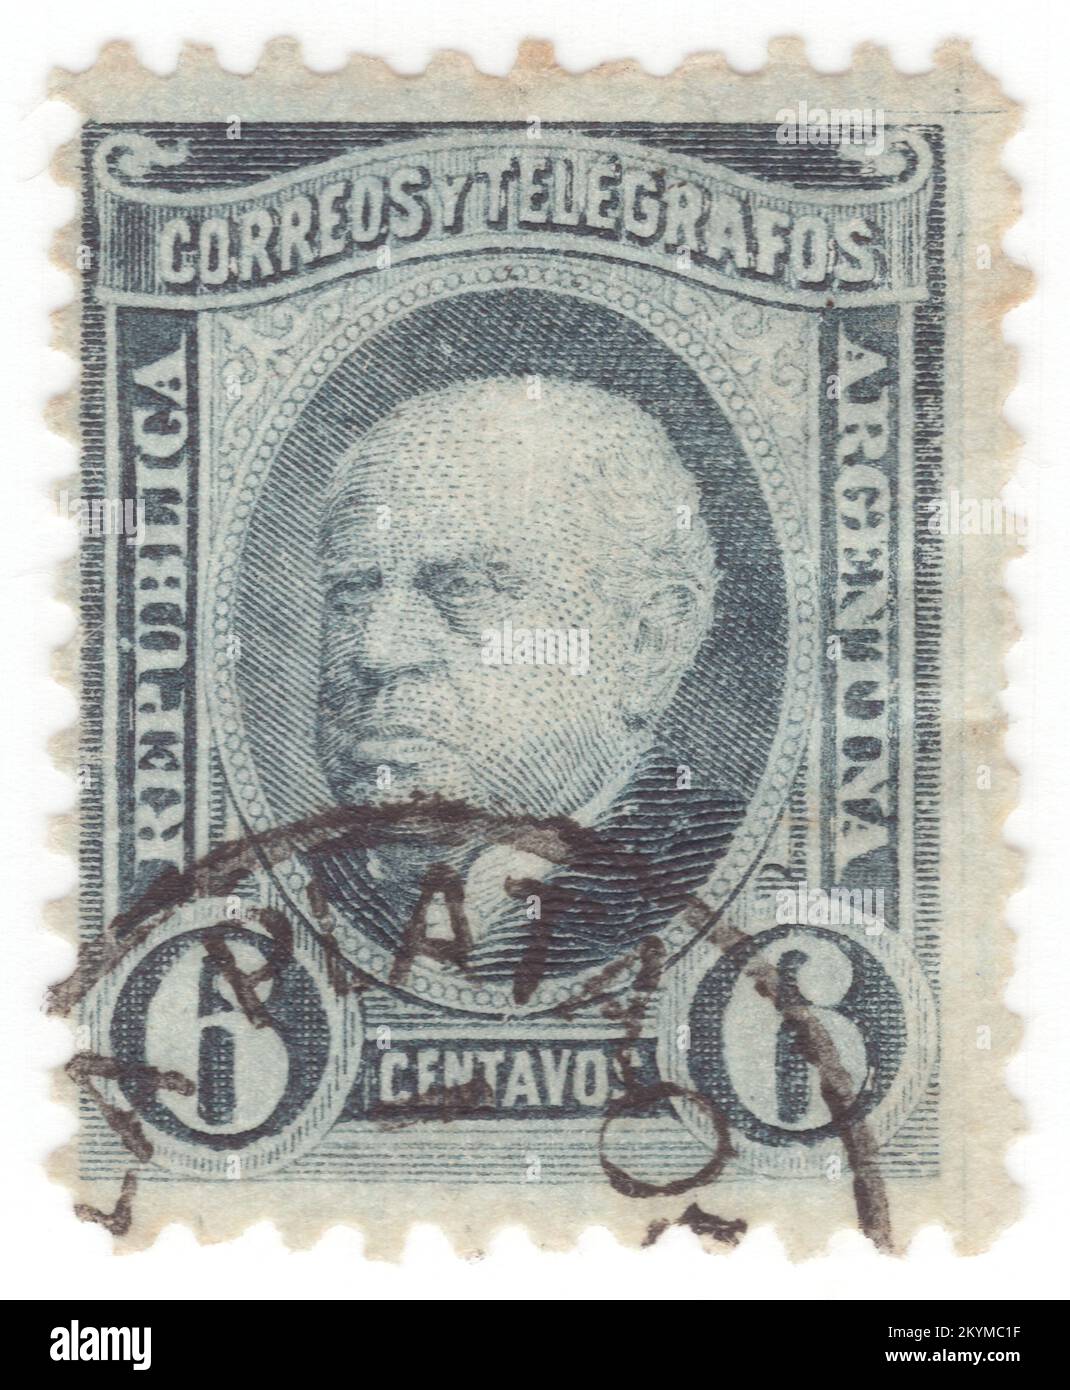 ARGENTINA - 1888: 6 centavos blue-black postage stamp depicting portrait of Sarmiento. Domingo Faustino Sarmiento was an Argentine activist, intellectual, writer, statesman and the second President of Argentina. His writing spanned a wide range of genres and topics, from journalism to autobiography, to political philosophy and history. He was a member of a group of intellectuals, known as the Generation of 1837, who had a great influence on 19th-century Argentina. He was particularly concerned with educational issues and was also an important influence on the region's literature Stock Photo